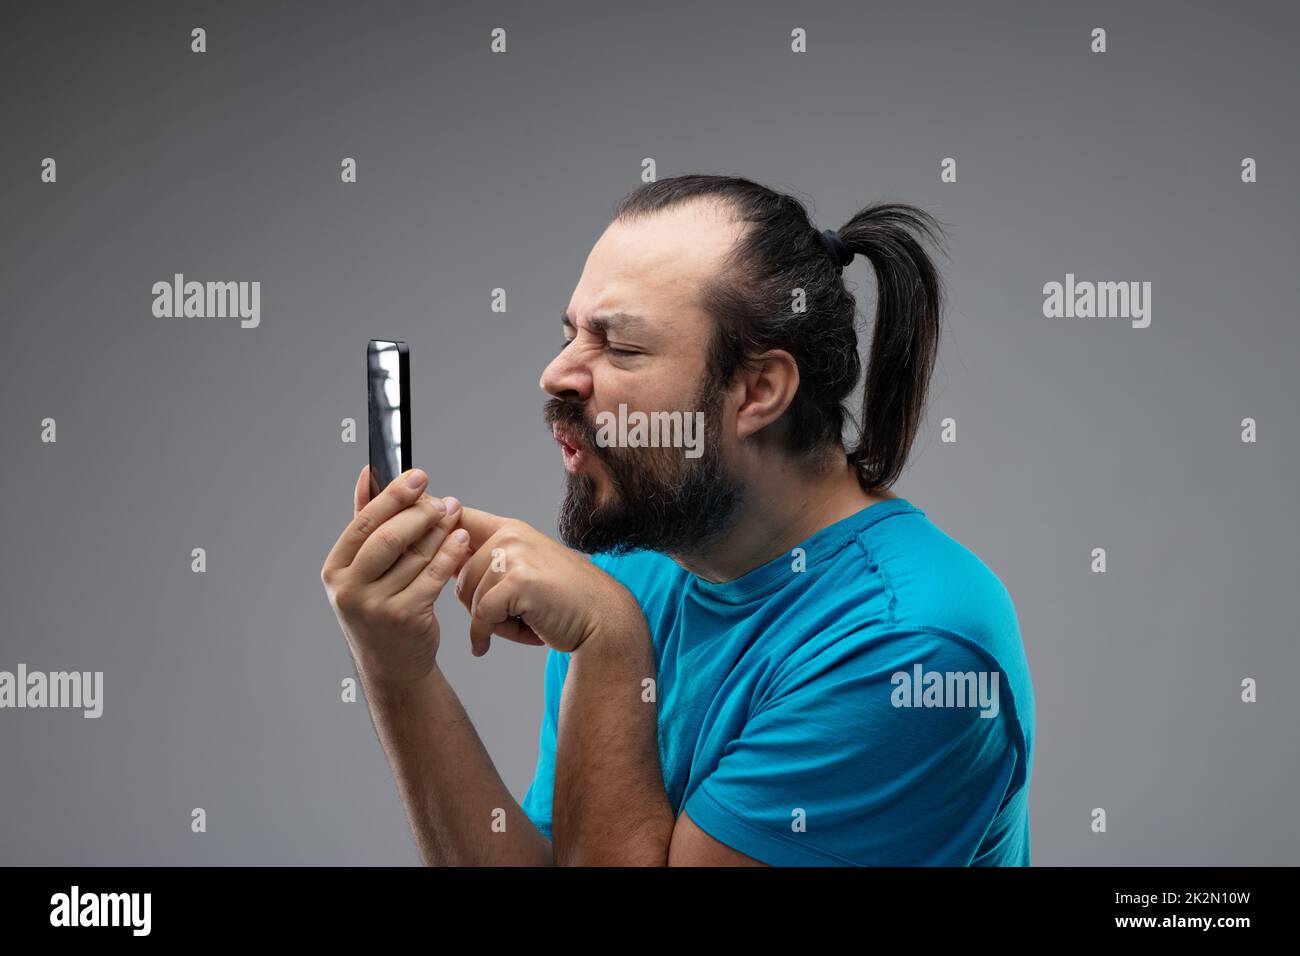 Man grimacing while using smartphone Stock Photo